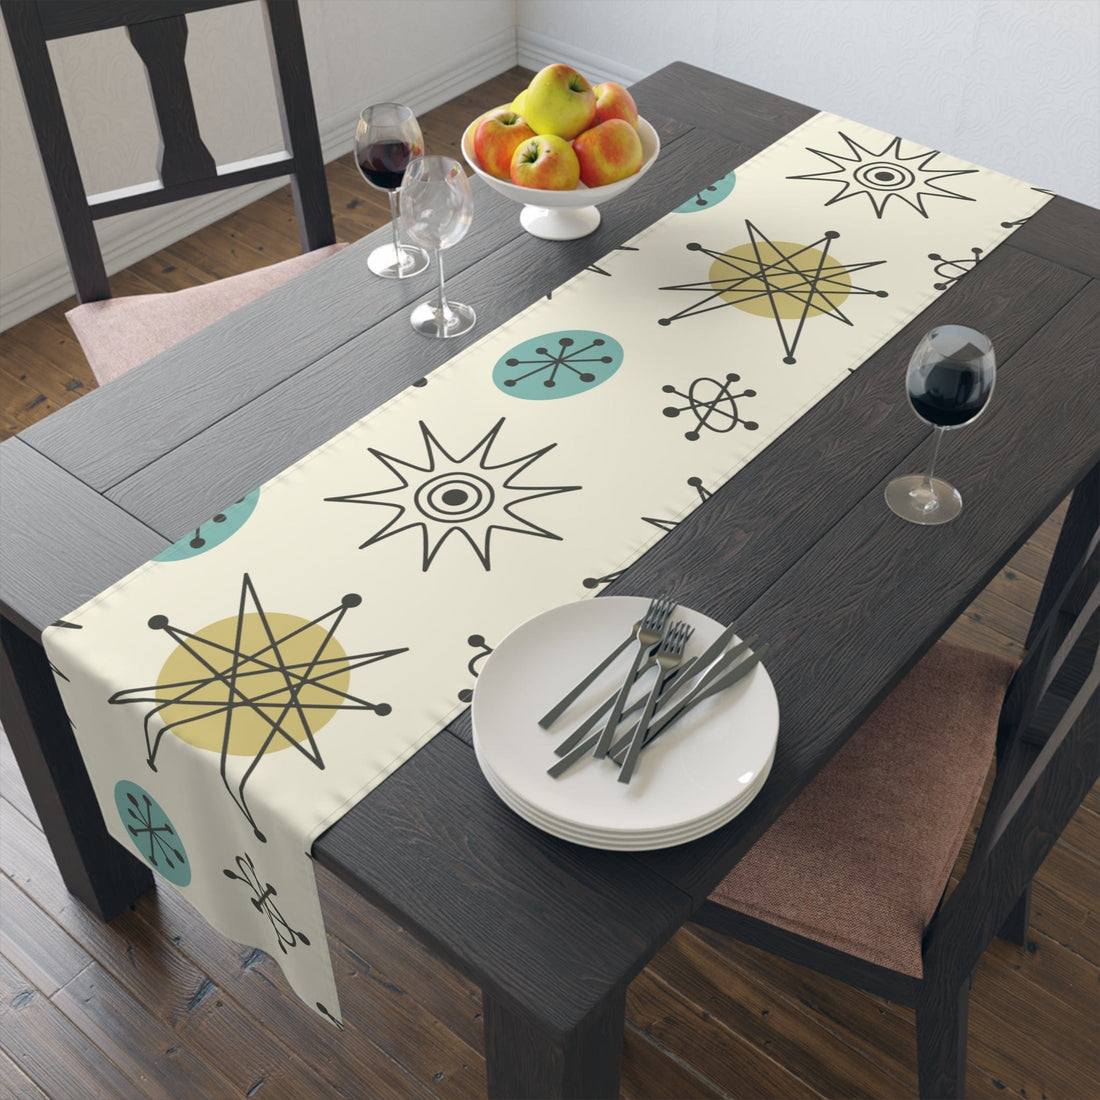 Kate McEnroe New York Classic Franciscan Starburst Table Runner, 50s Mid Century Modern Atomic Retro Cream, Aqua Blue, Green Table Linens Table Runners 16&quot; × 72&quot; / Cotton Twill 33137211802521591661